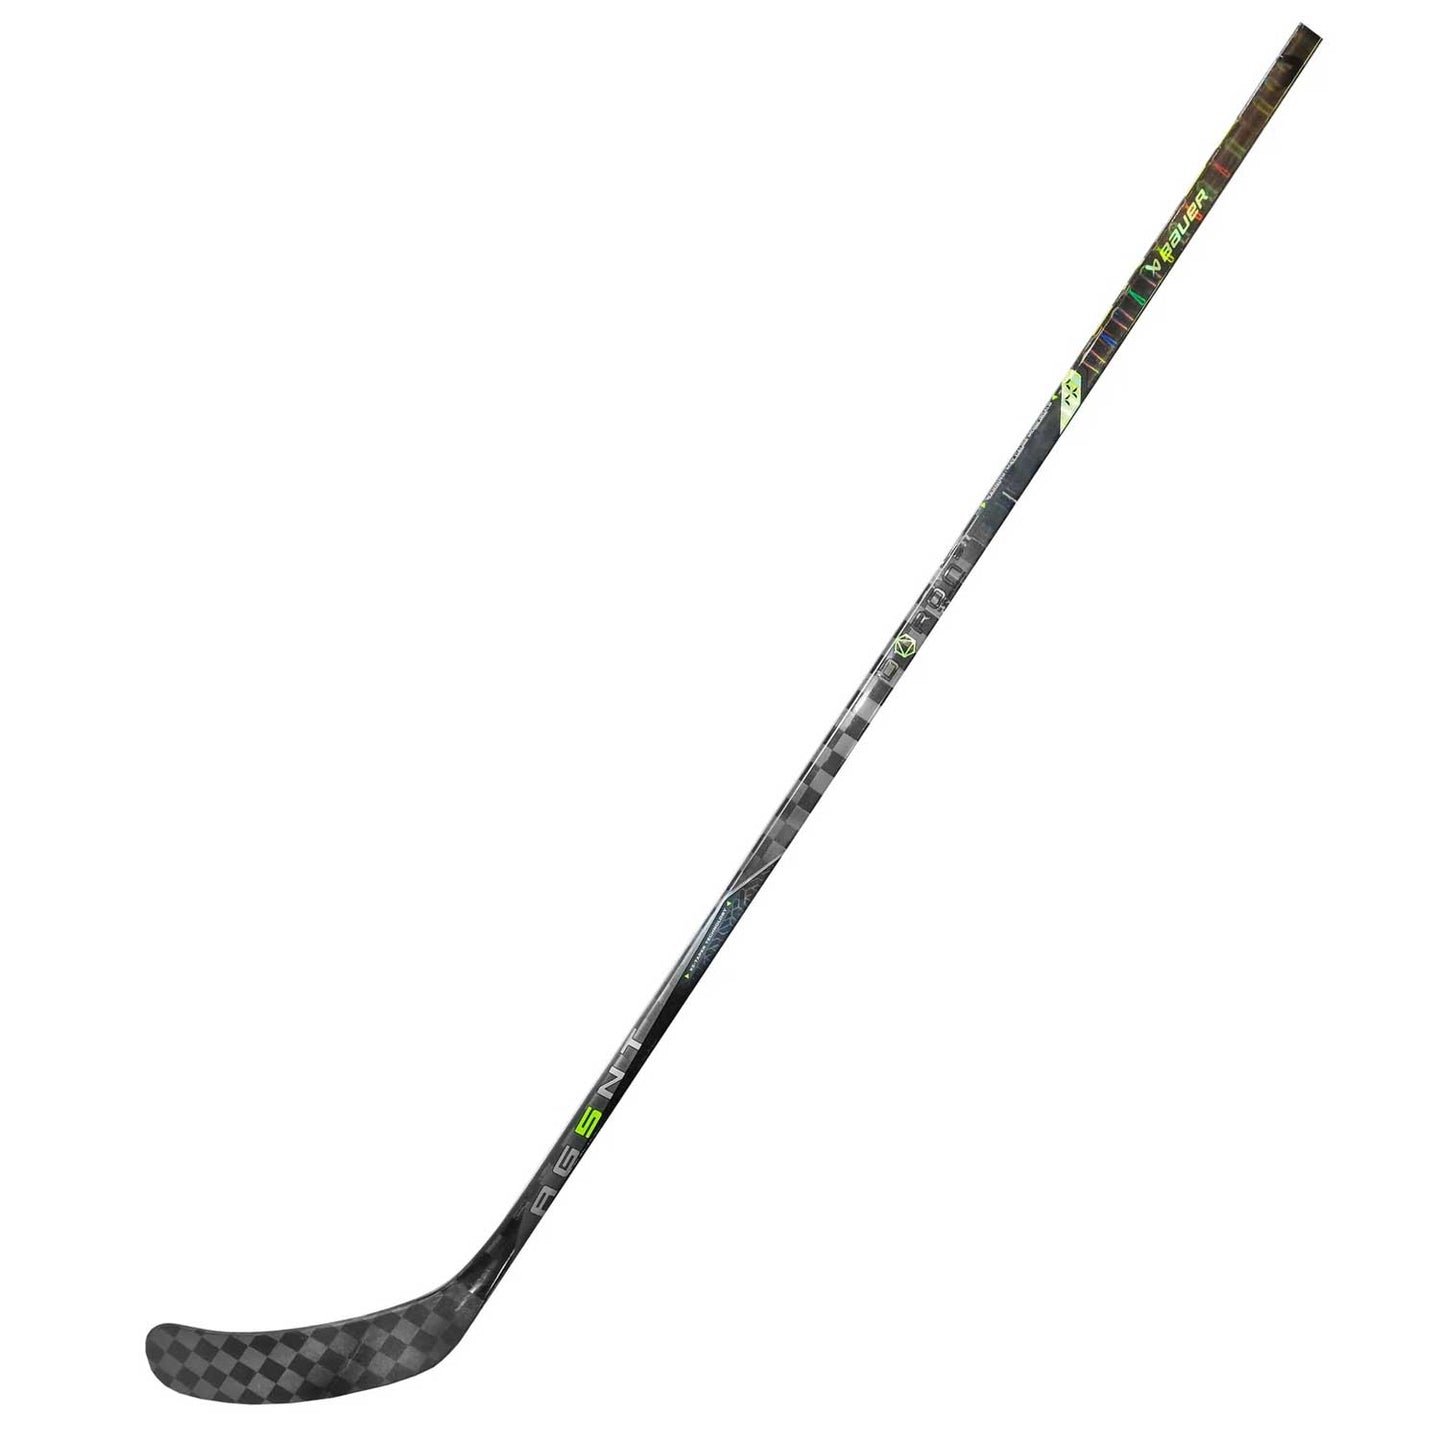 Full backhand view picture of the Bauer AG5NT Grip Ice Hockey Stick (Senior)